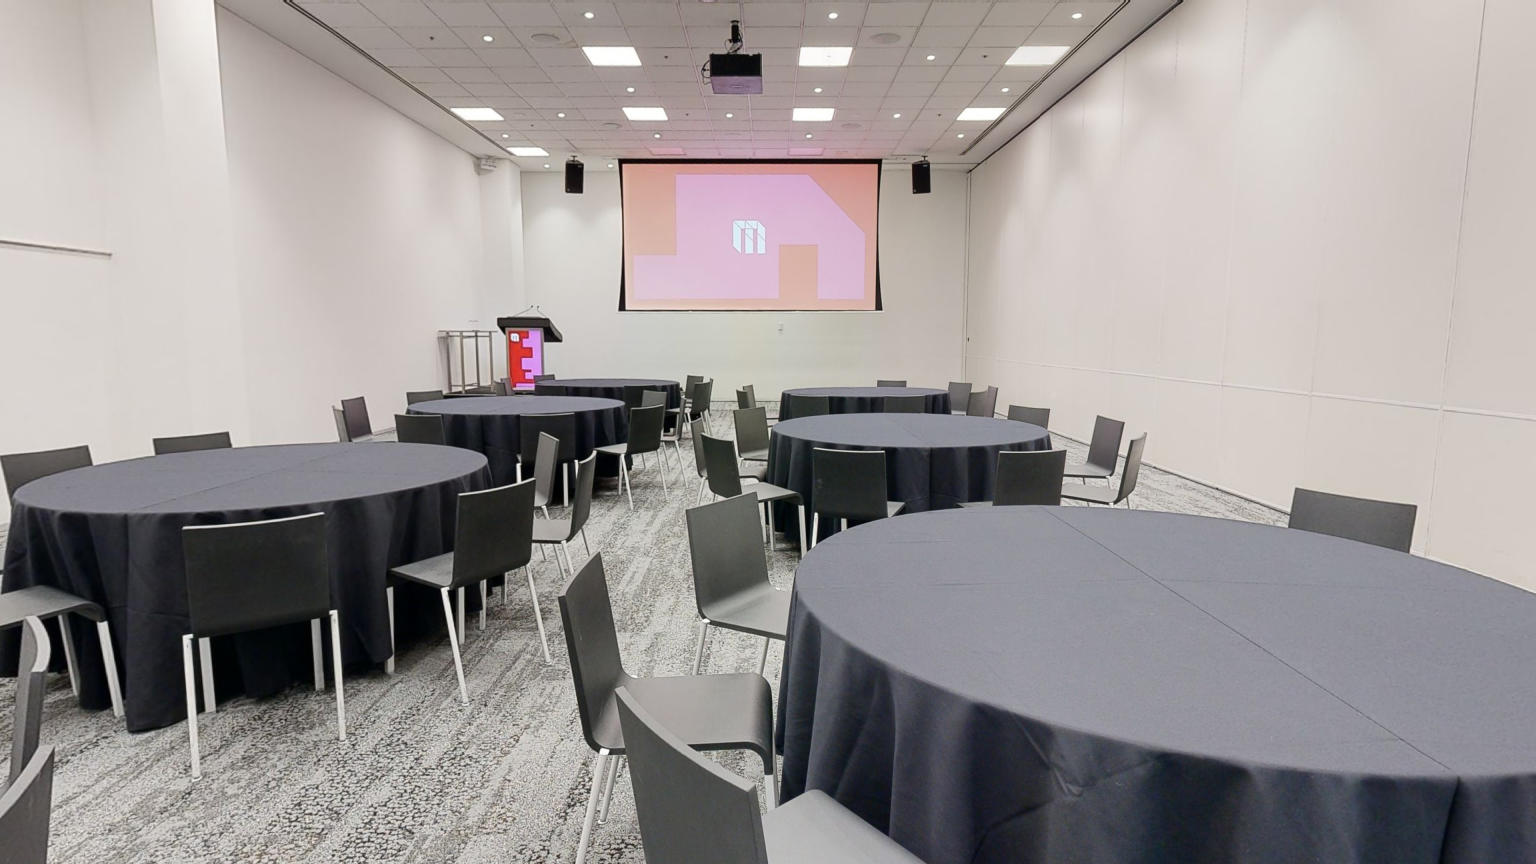 A professional conference or meeting room with neatly arranged round tables and chairs facing a large projector screen at the front of the room. A white MCEC logo is displayed on the screen over a pink and red shaped background. A lectern and stage sit to the side of the screen facing out towards the tables. 